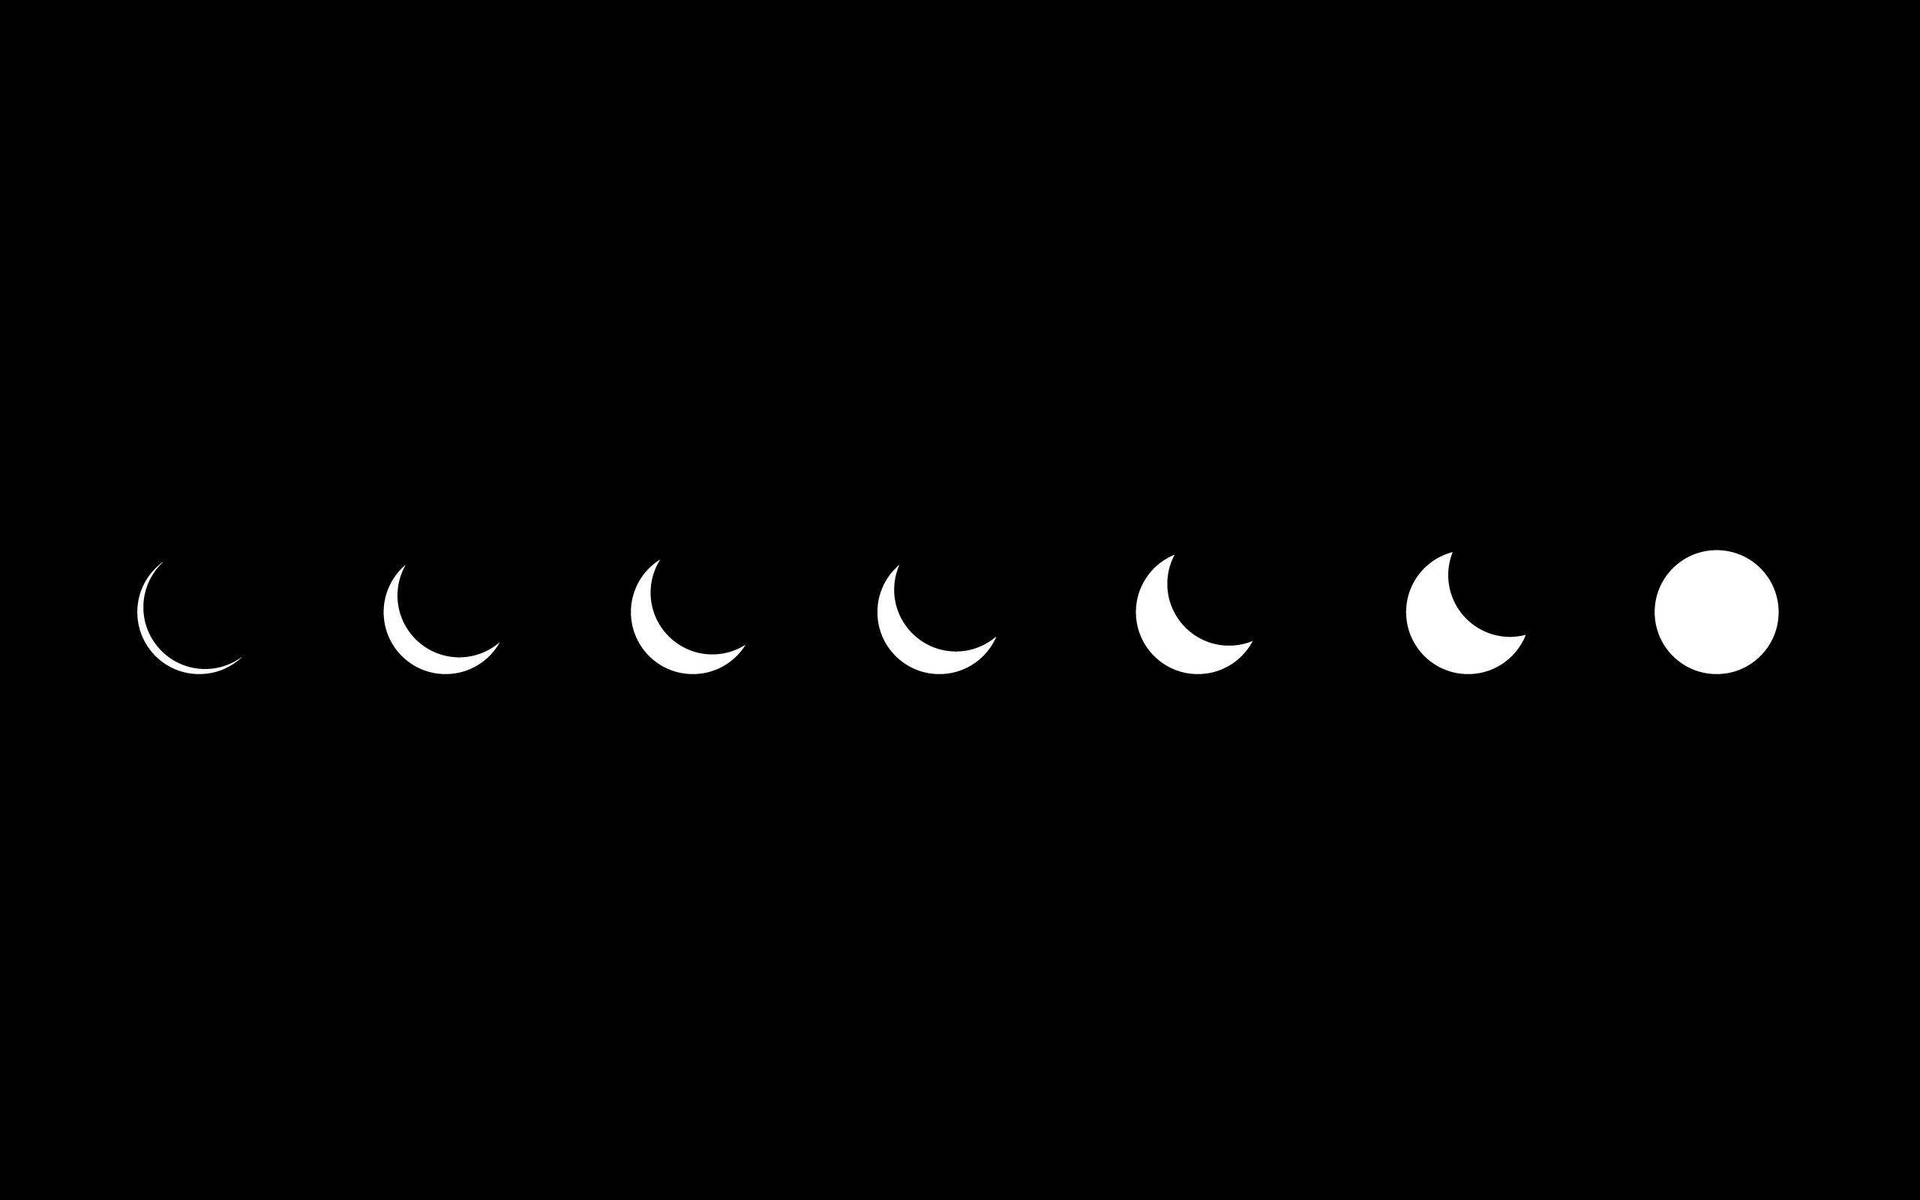 Dark Aesthetic Phases Of The Moon For Computer Wallpaper